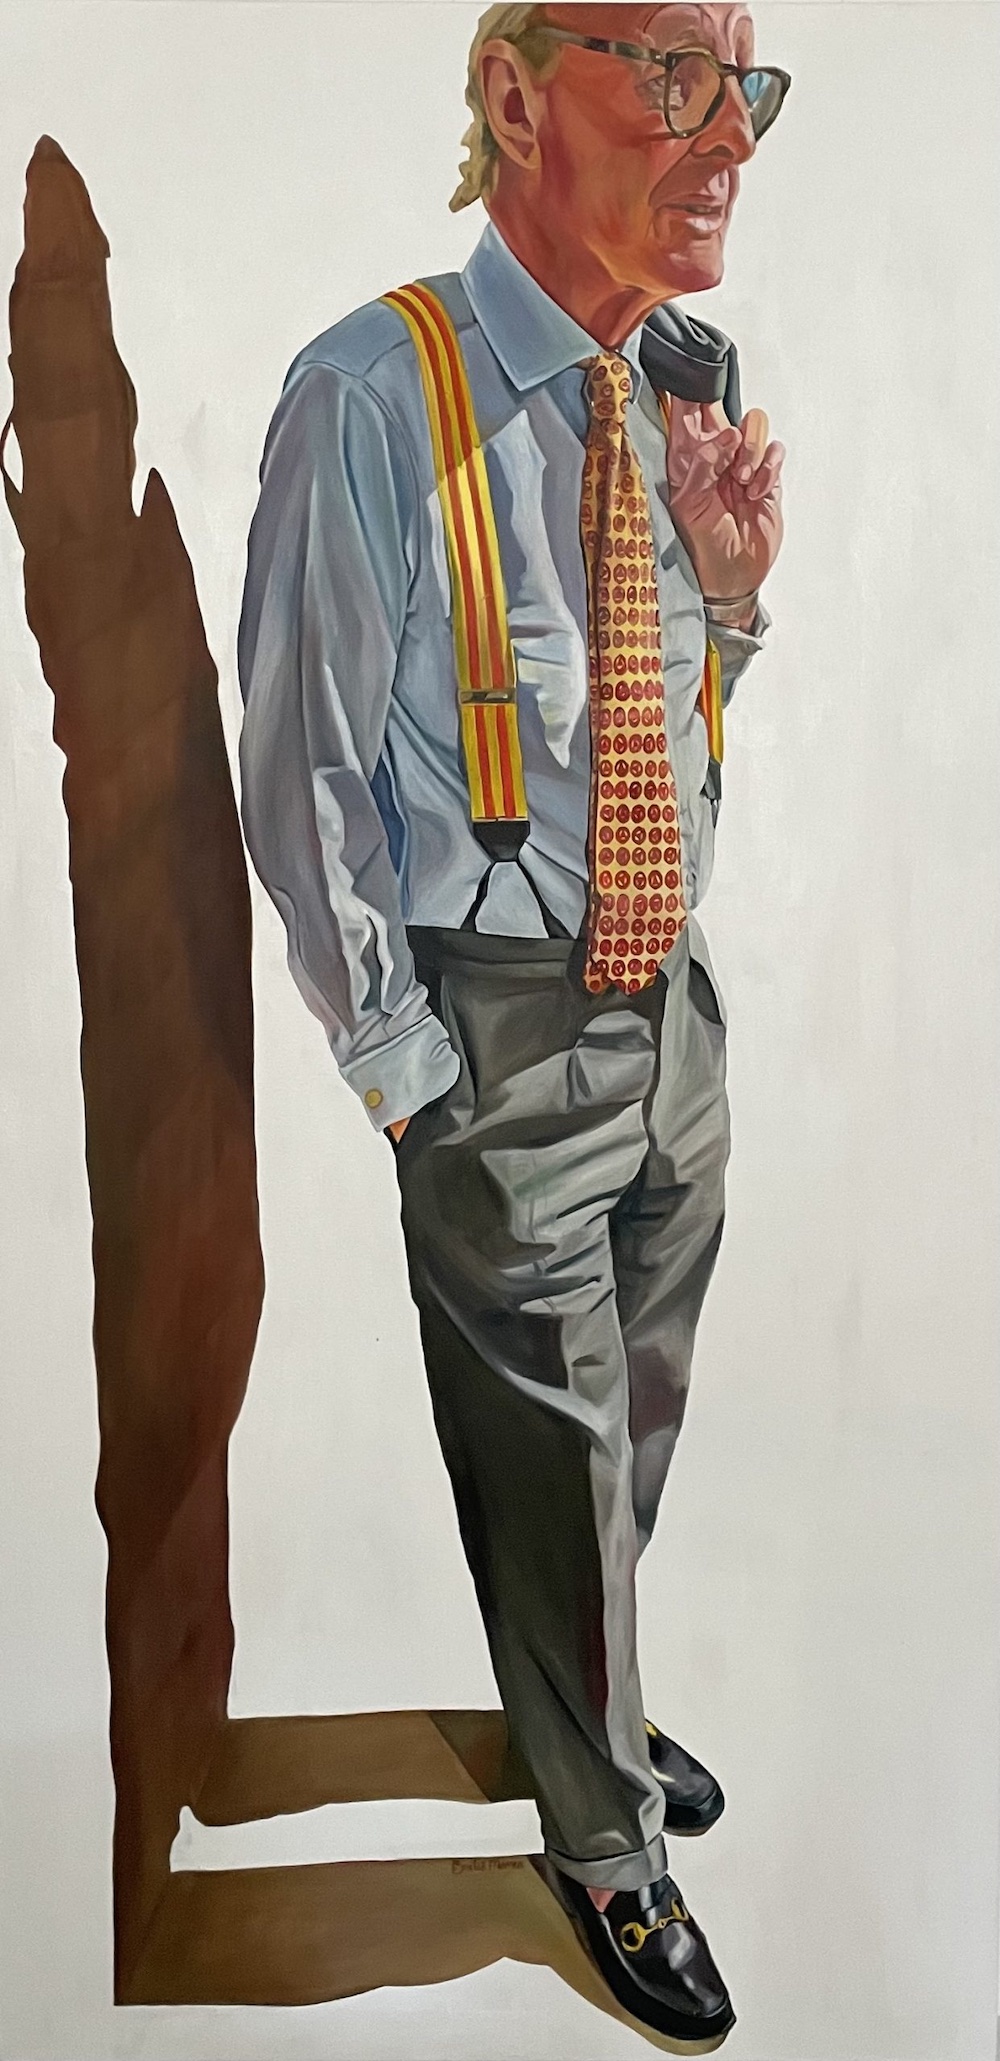 painting of an older man in business attire